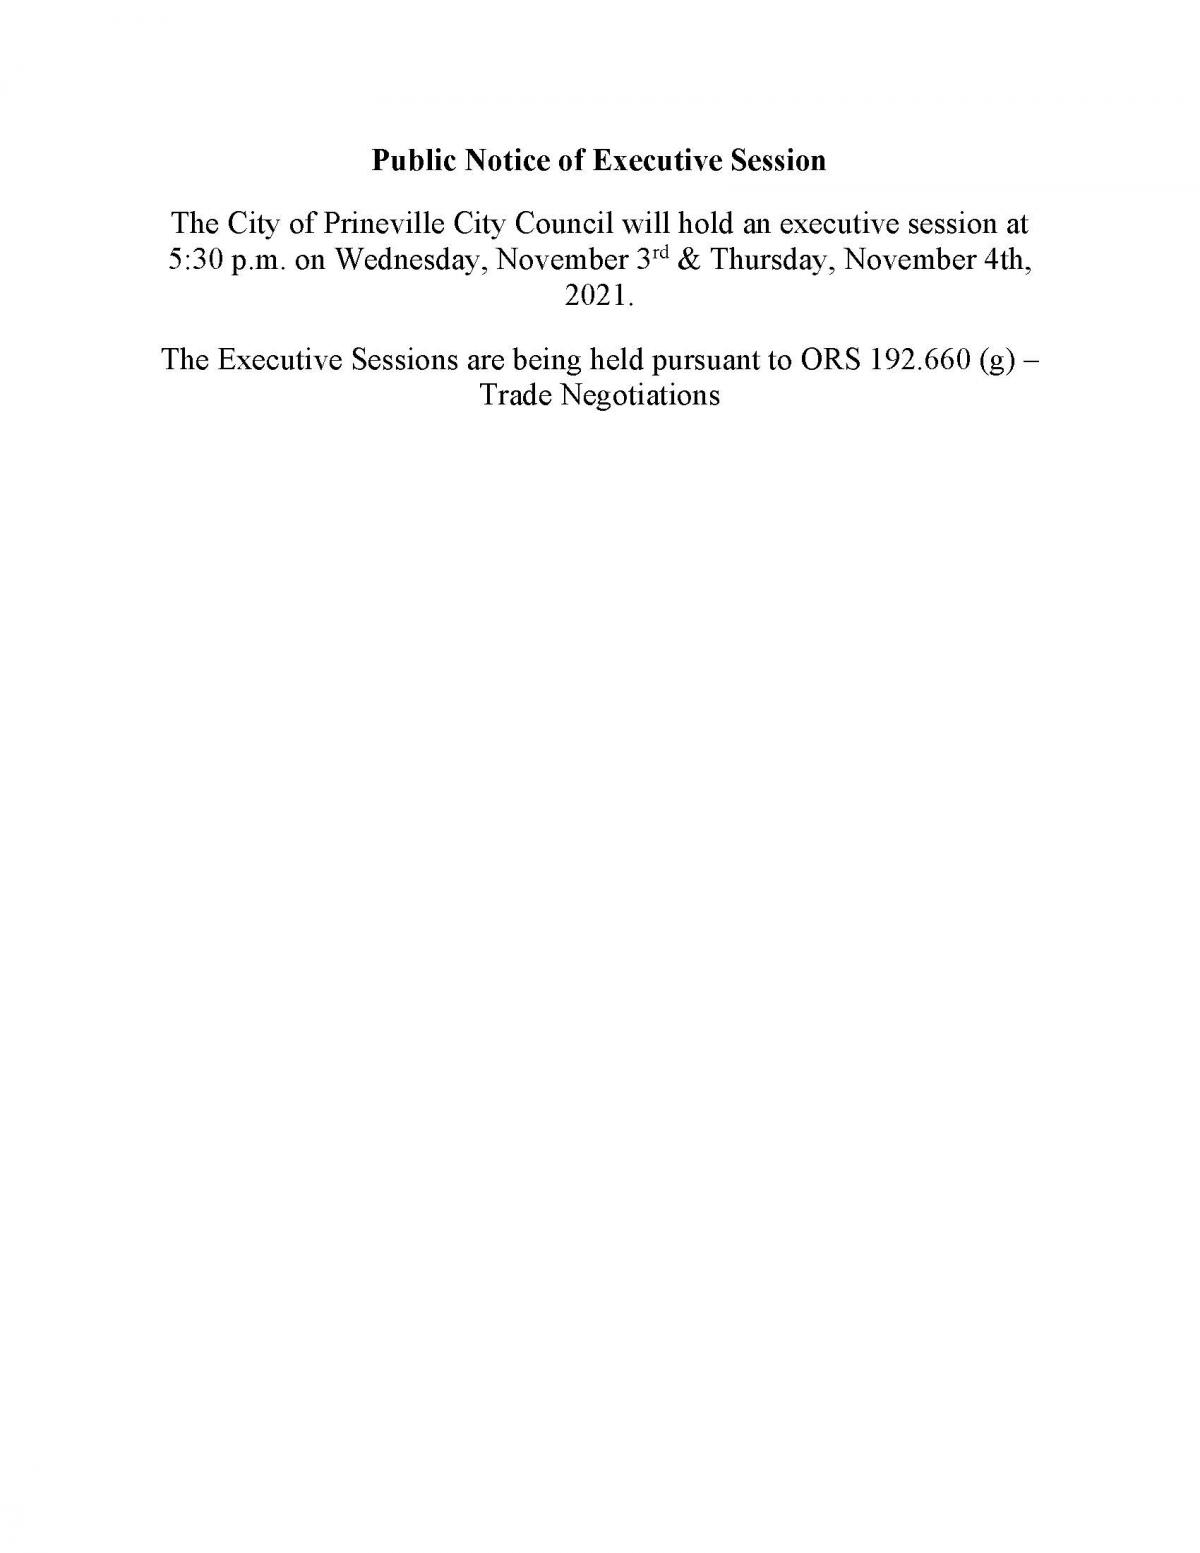 Public Notice - Council Executive Sessions 11-3 and 11-4